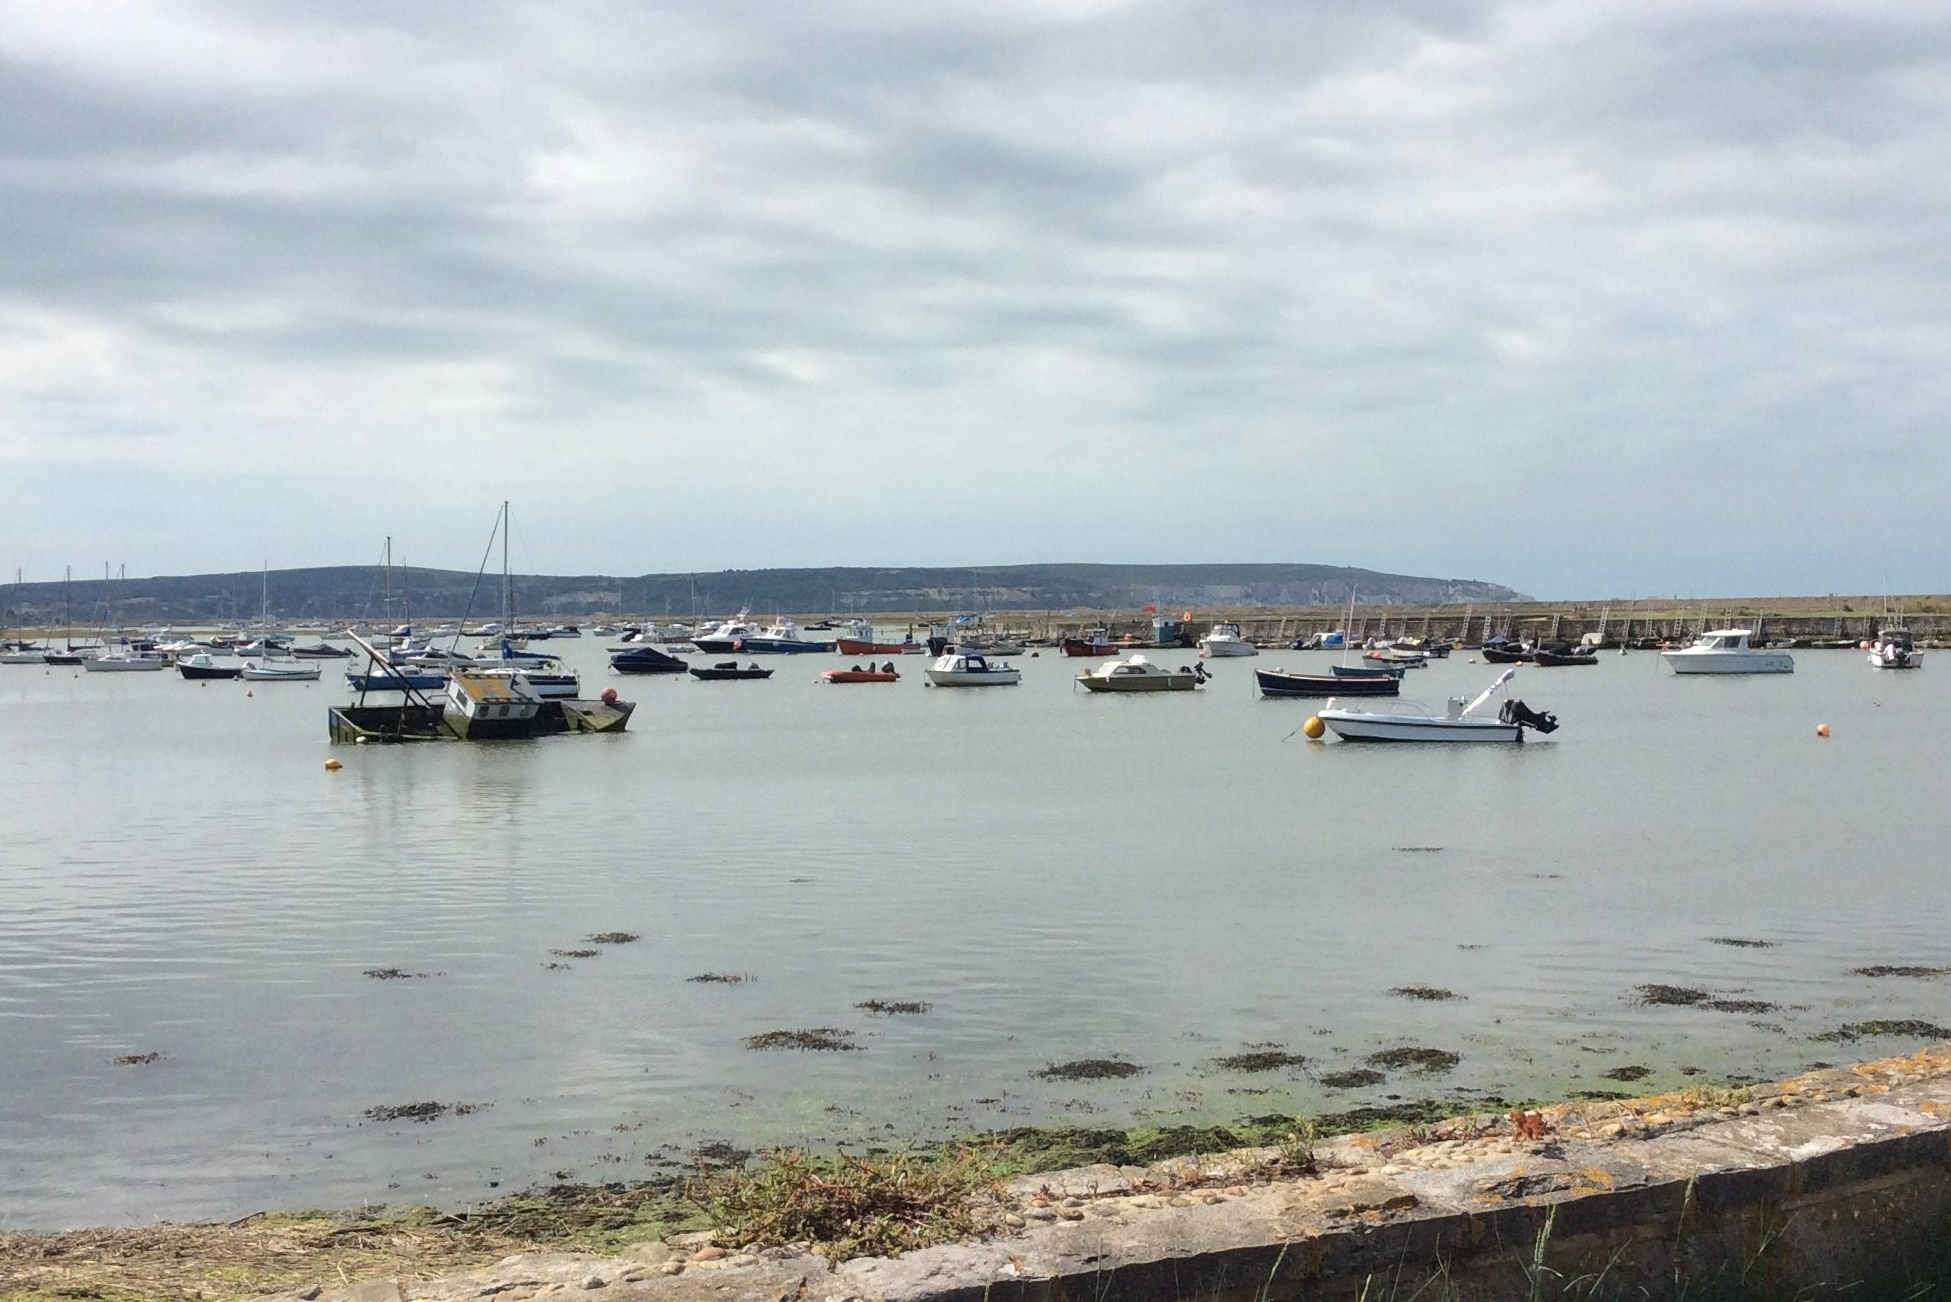 Keyhaven harbour with yachts